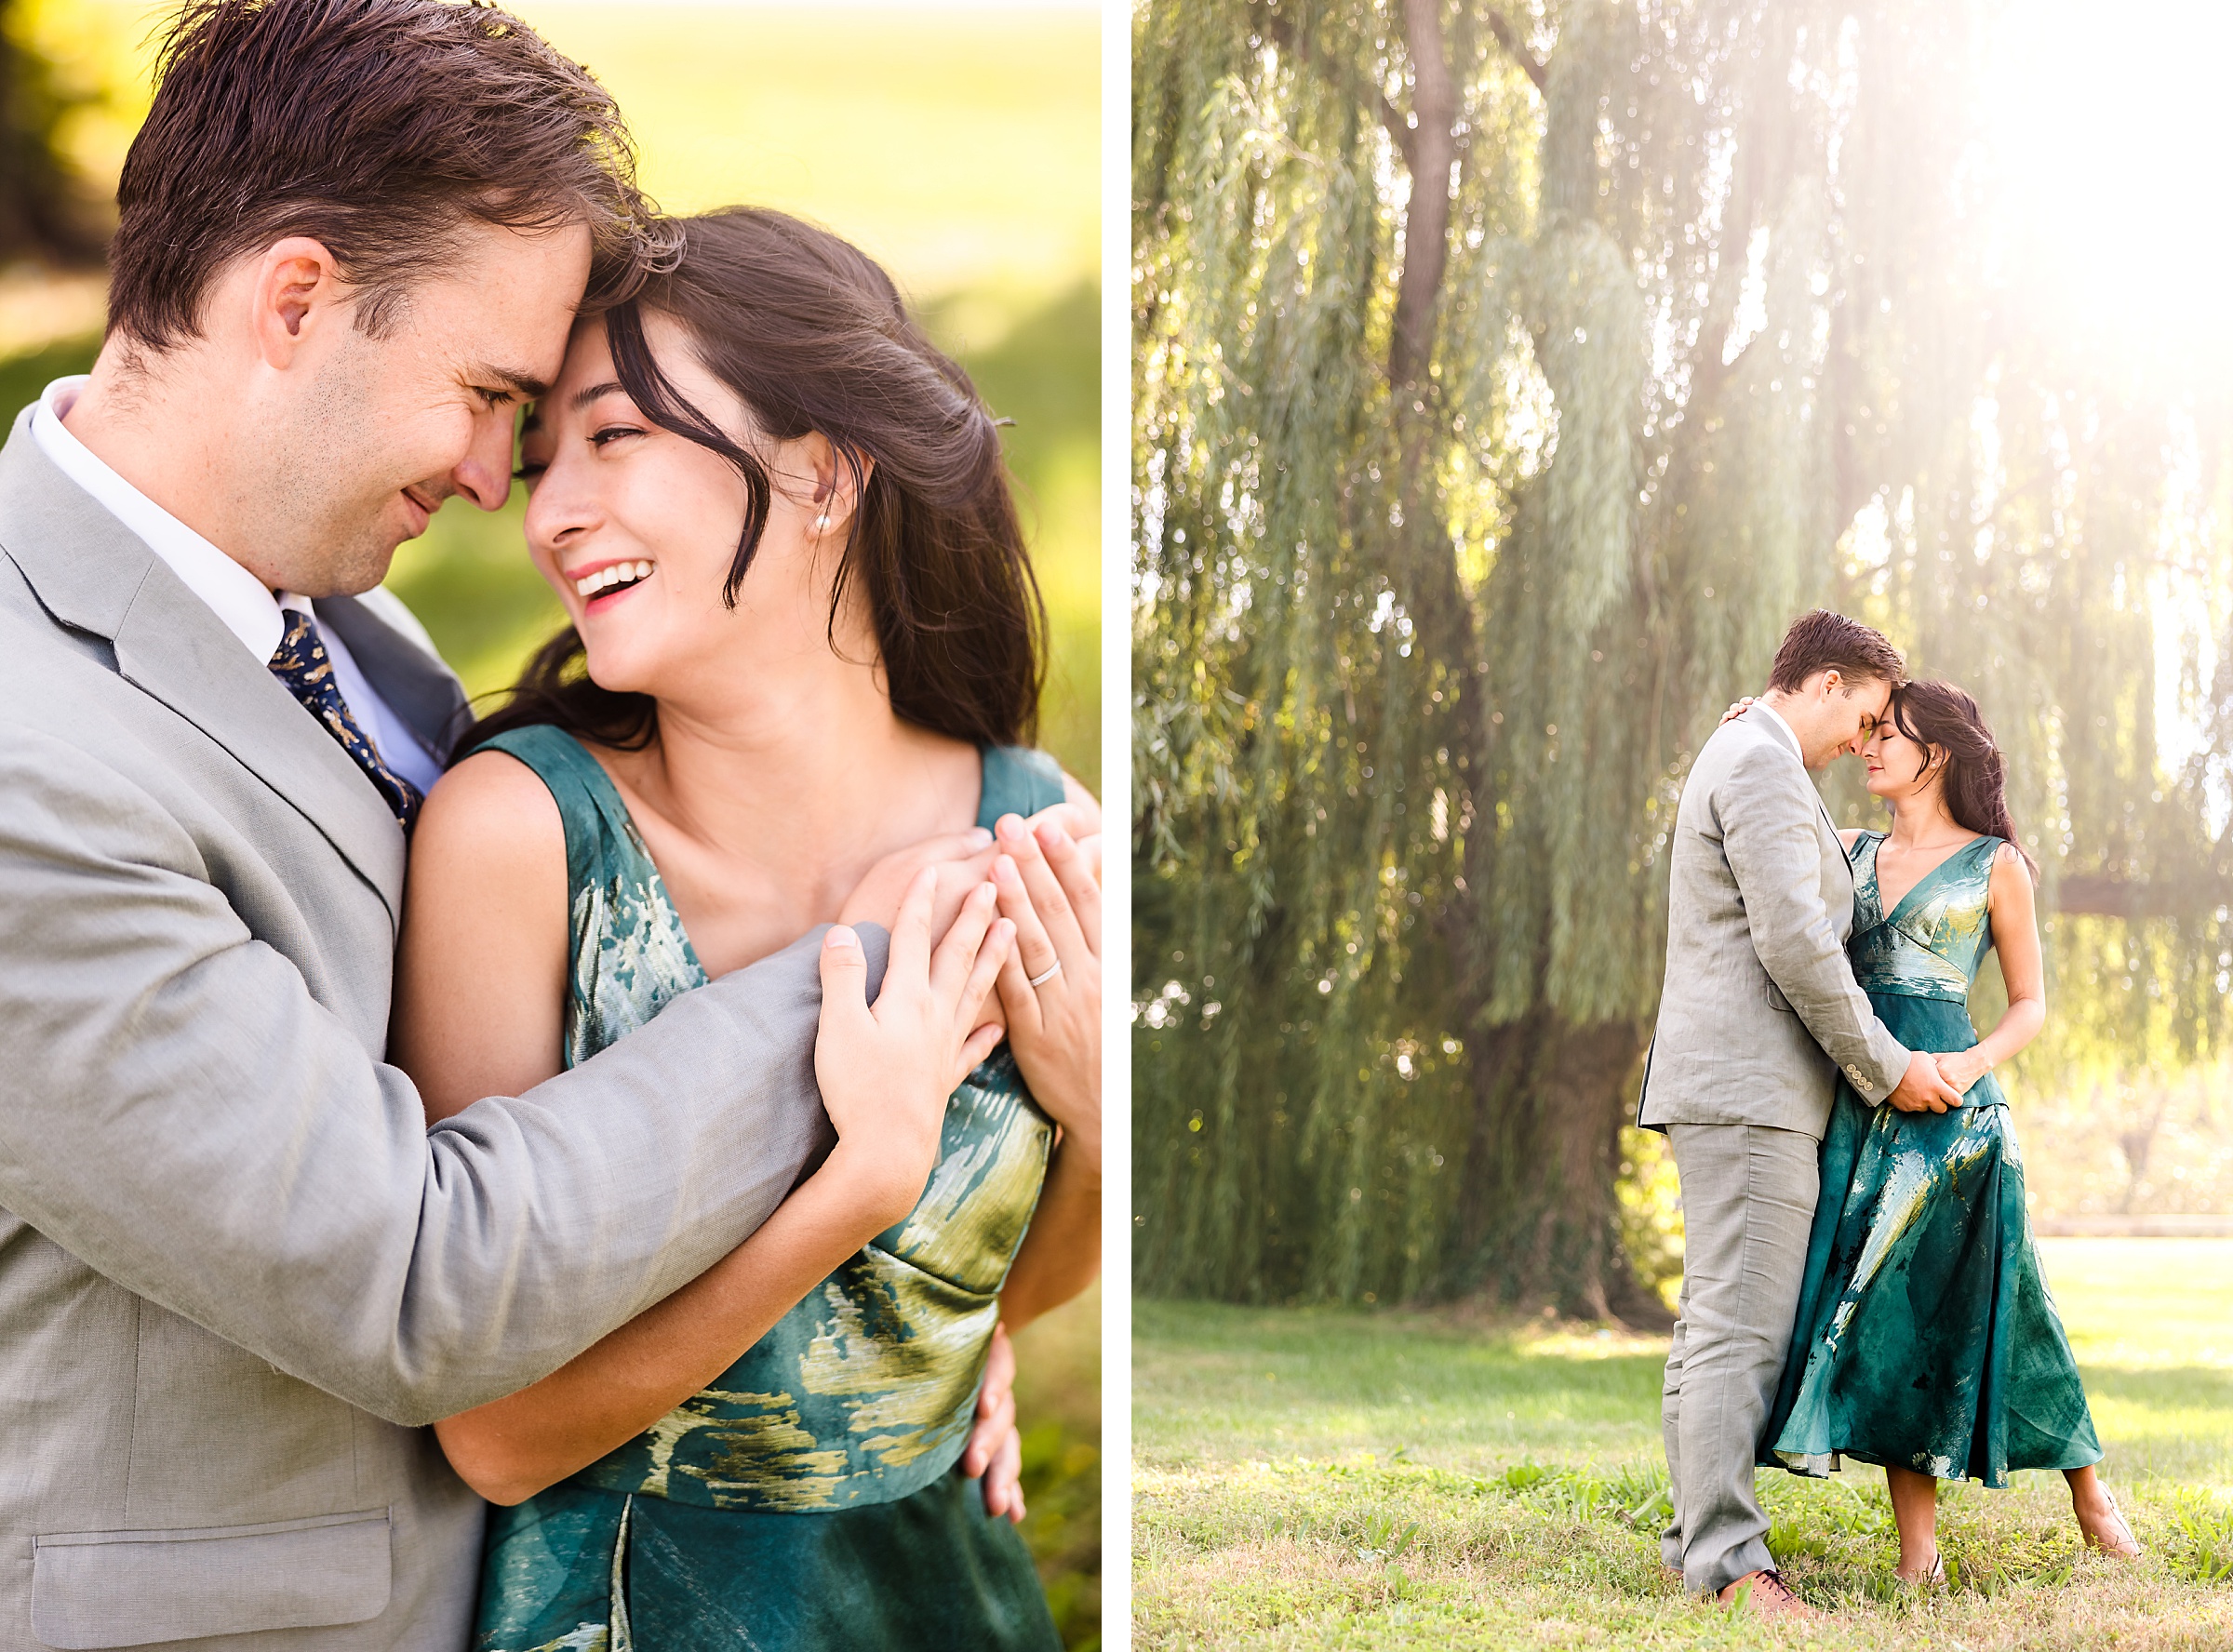 Couple embrace during their session in Washington D.C